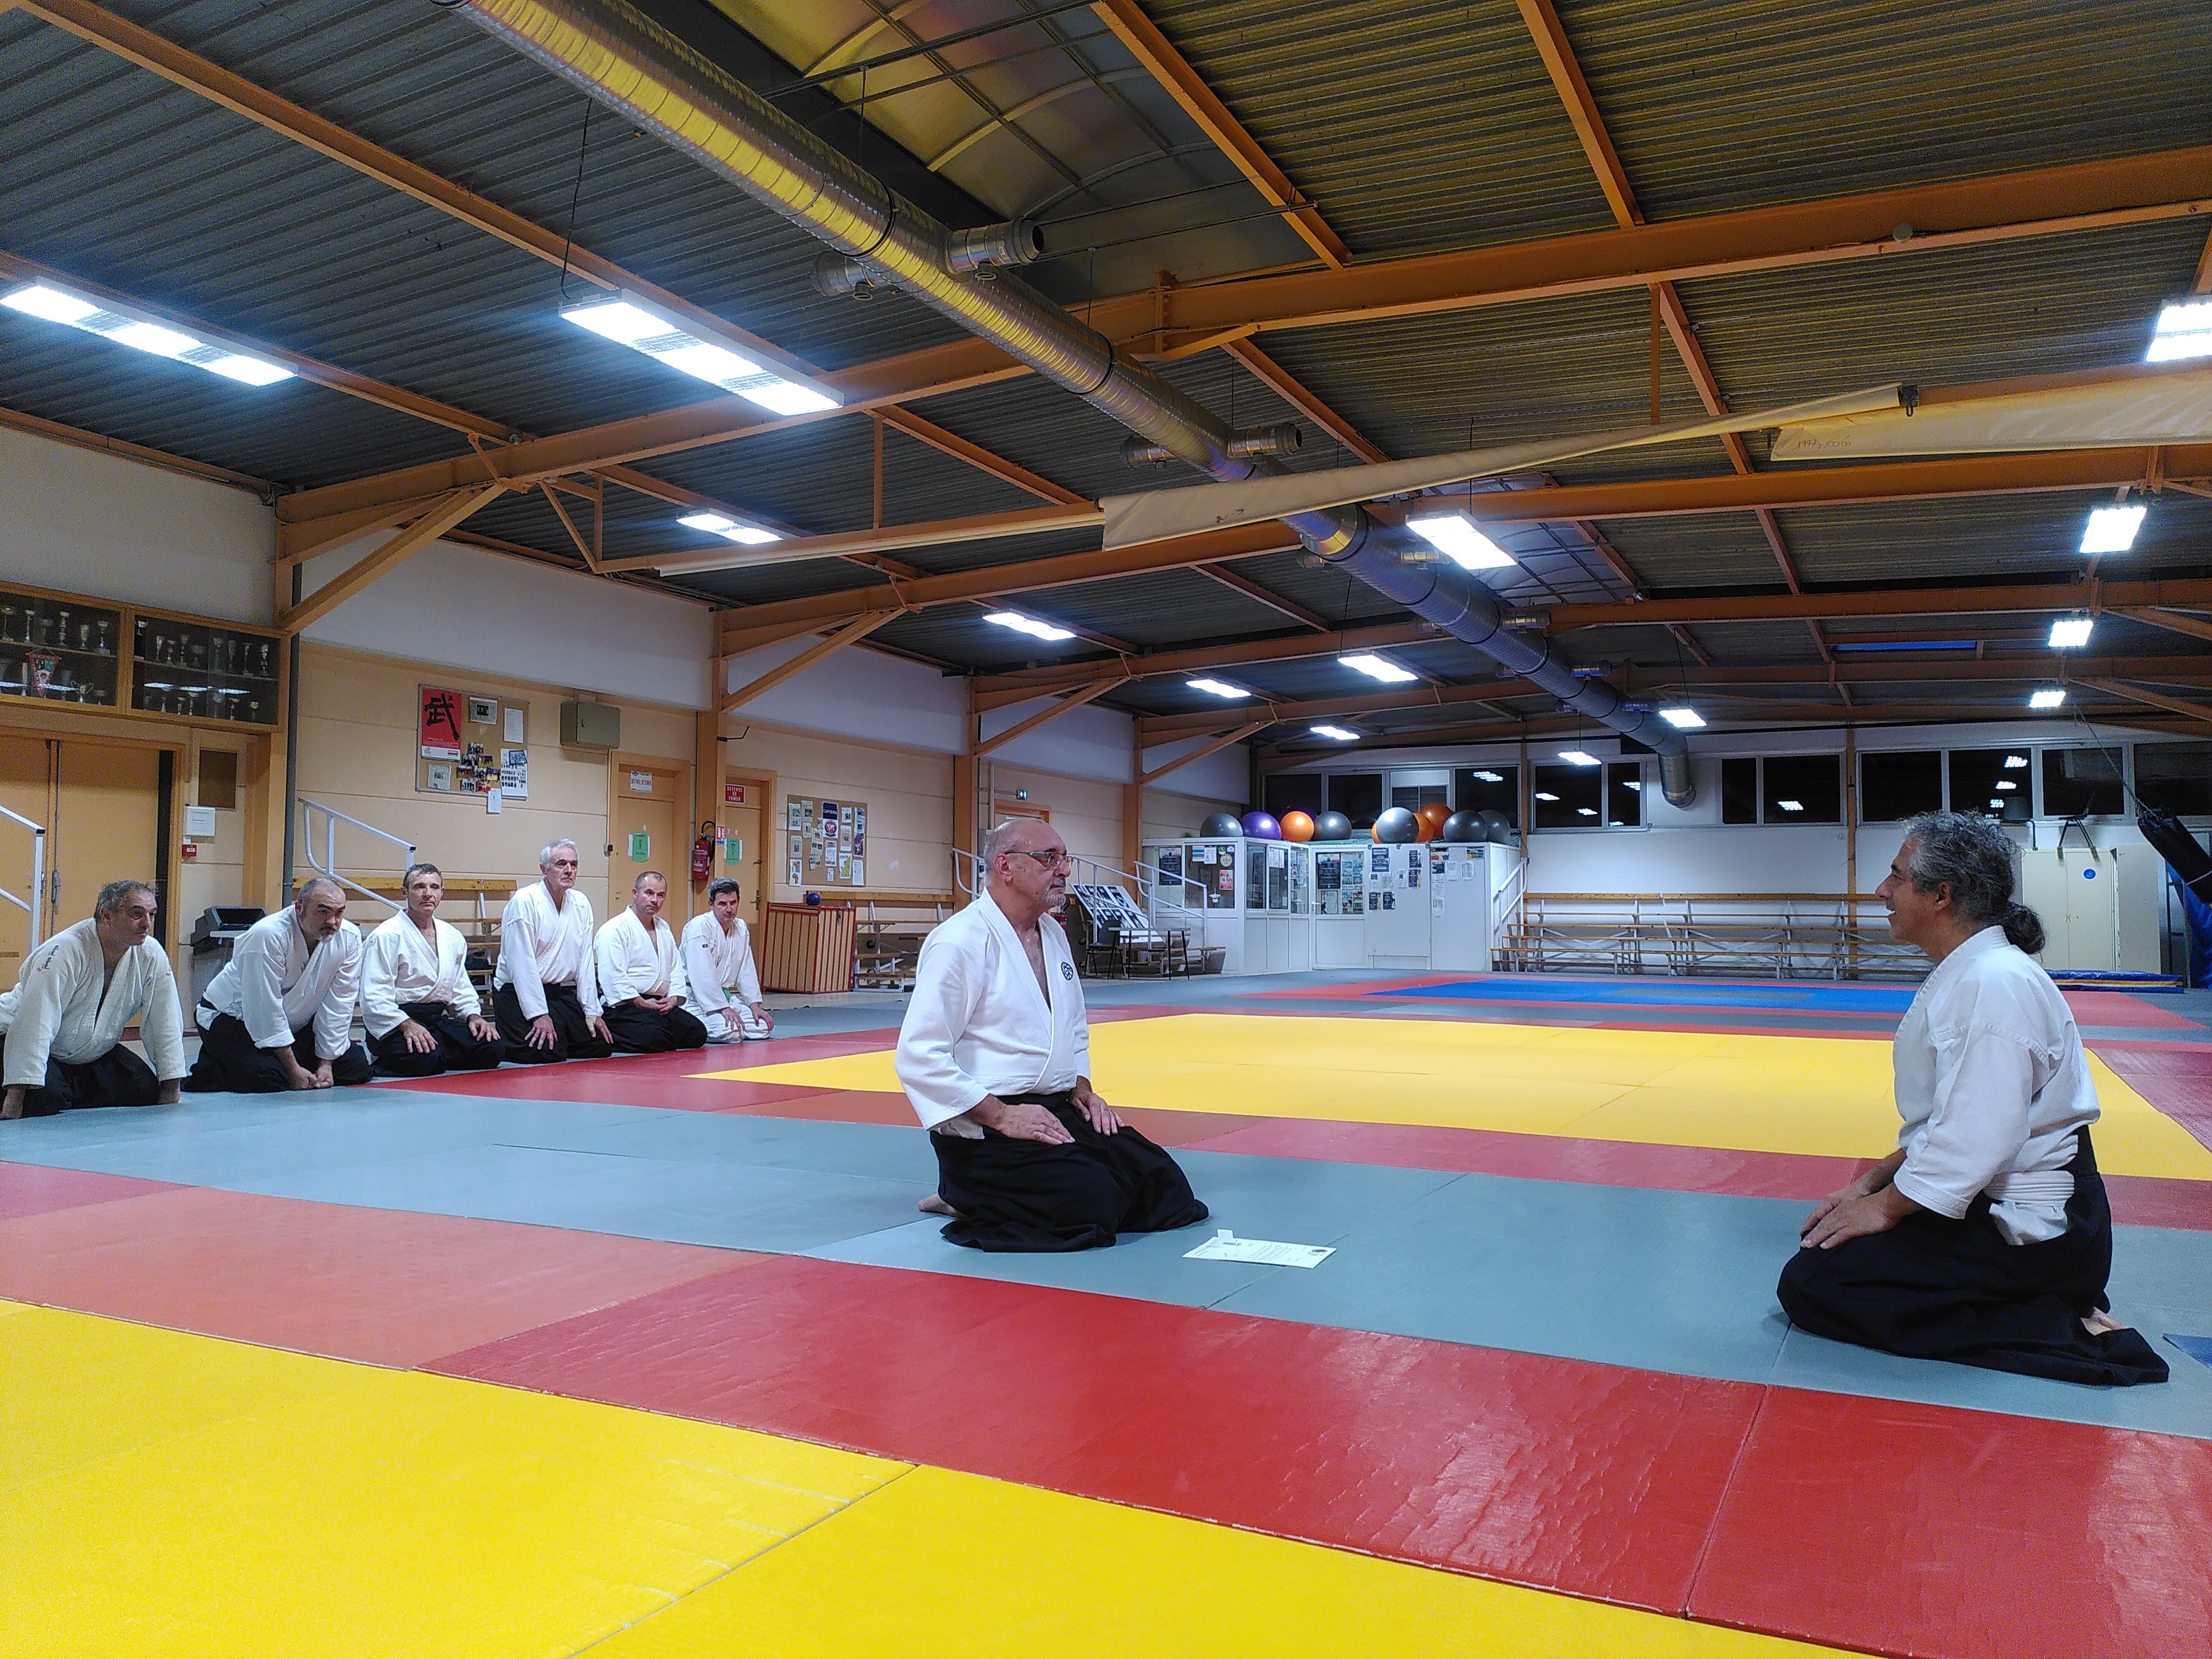 Image Jean-Pierre - Vineuil Sports Aikido